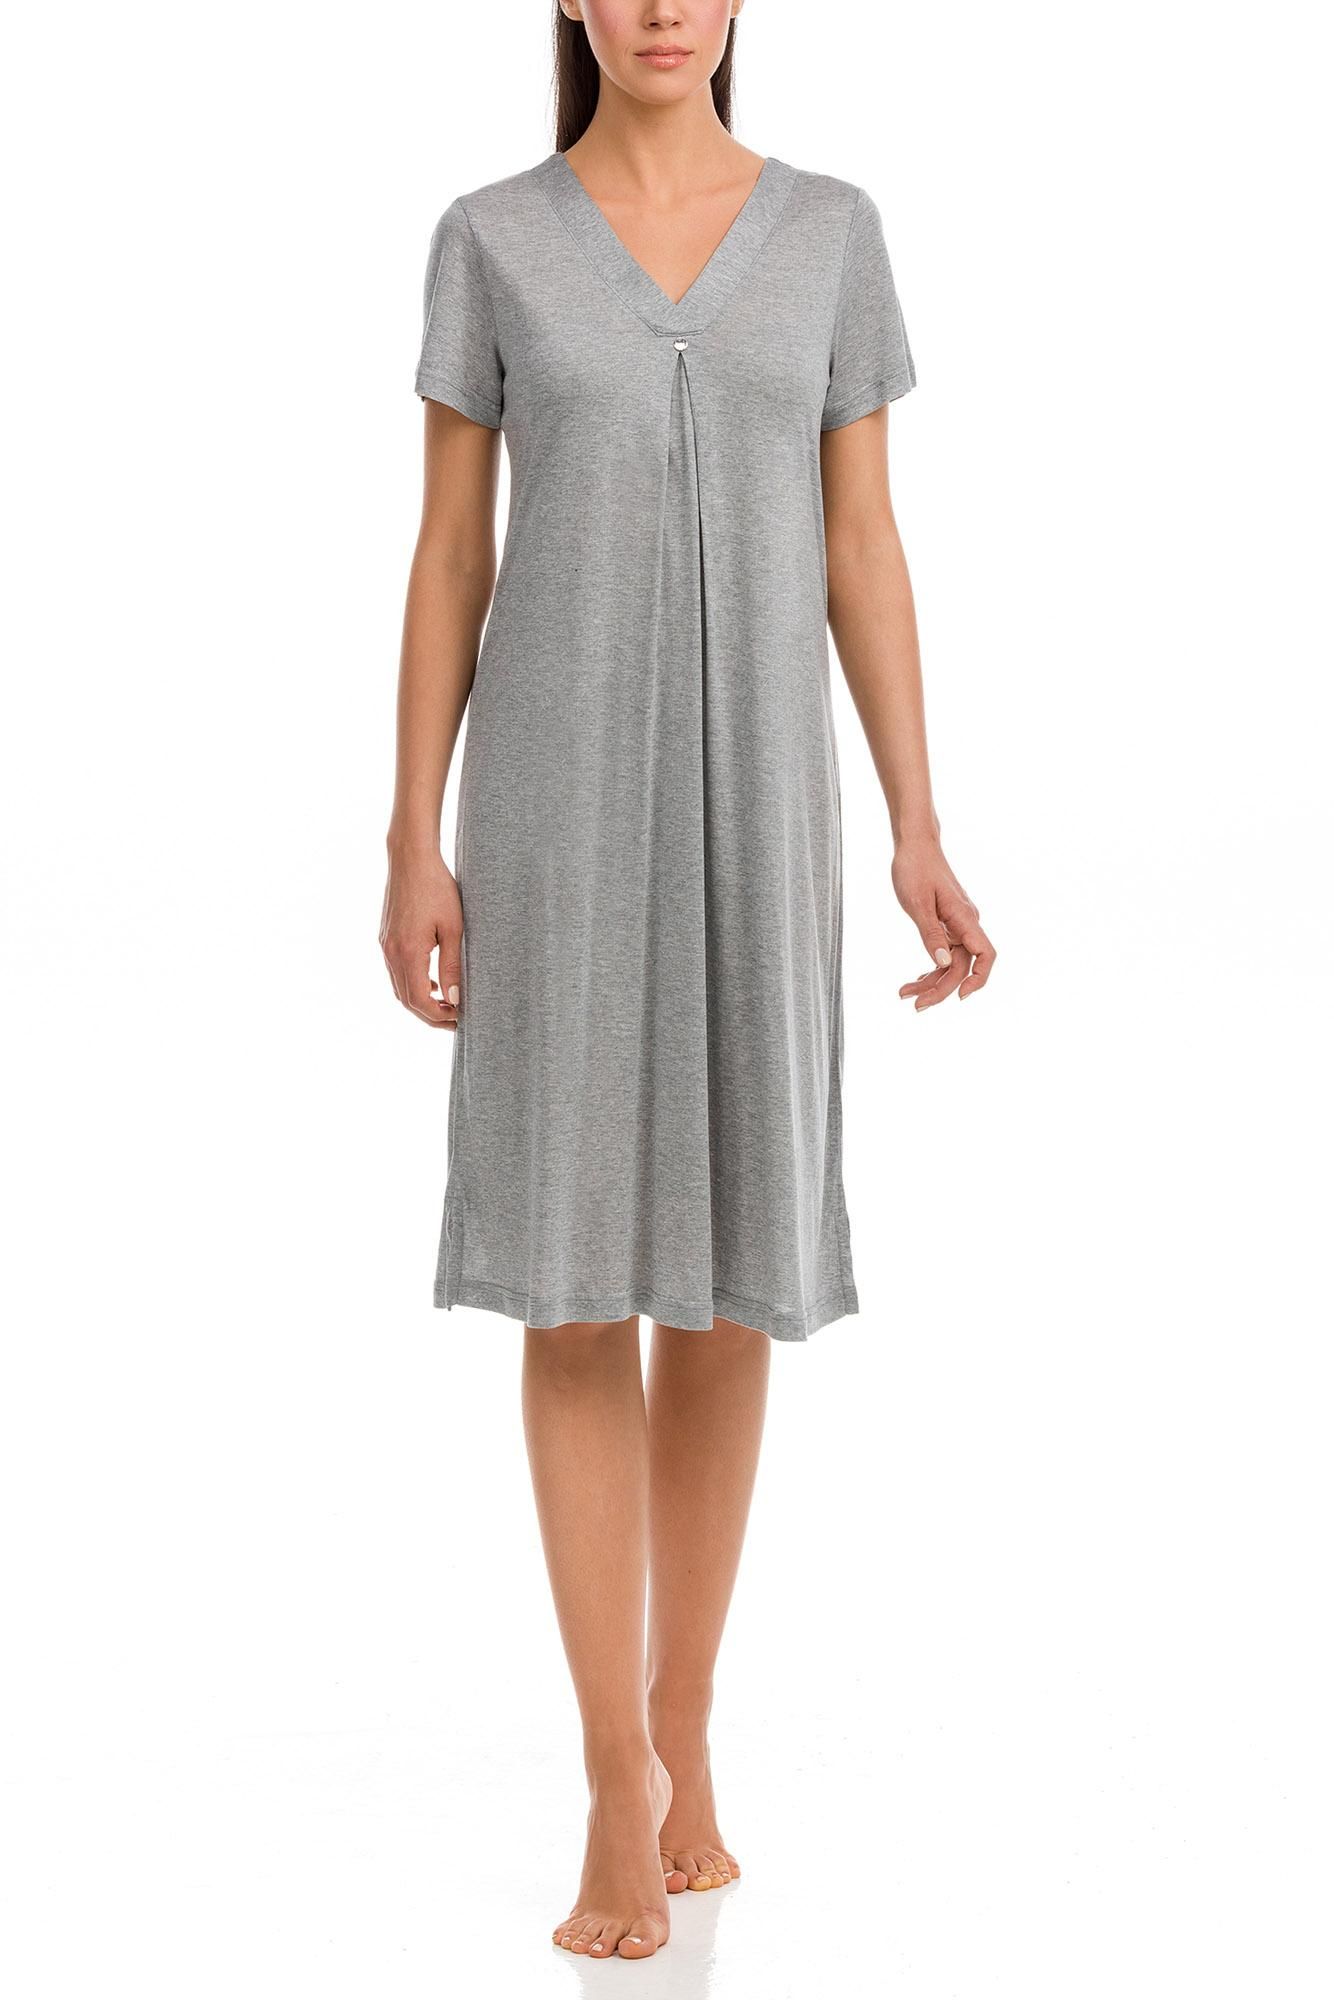 NIGHTGOWN 100% MICROMODAL